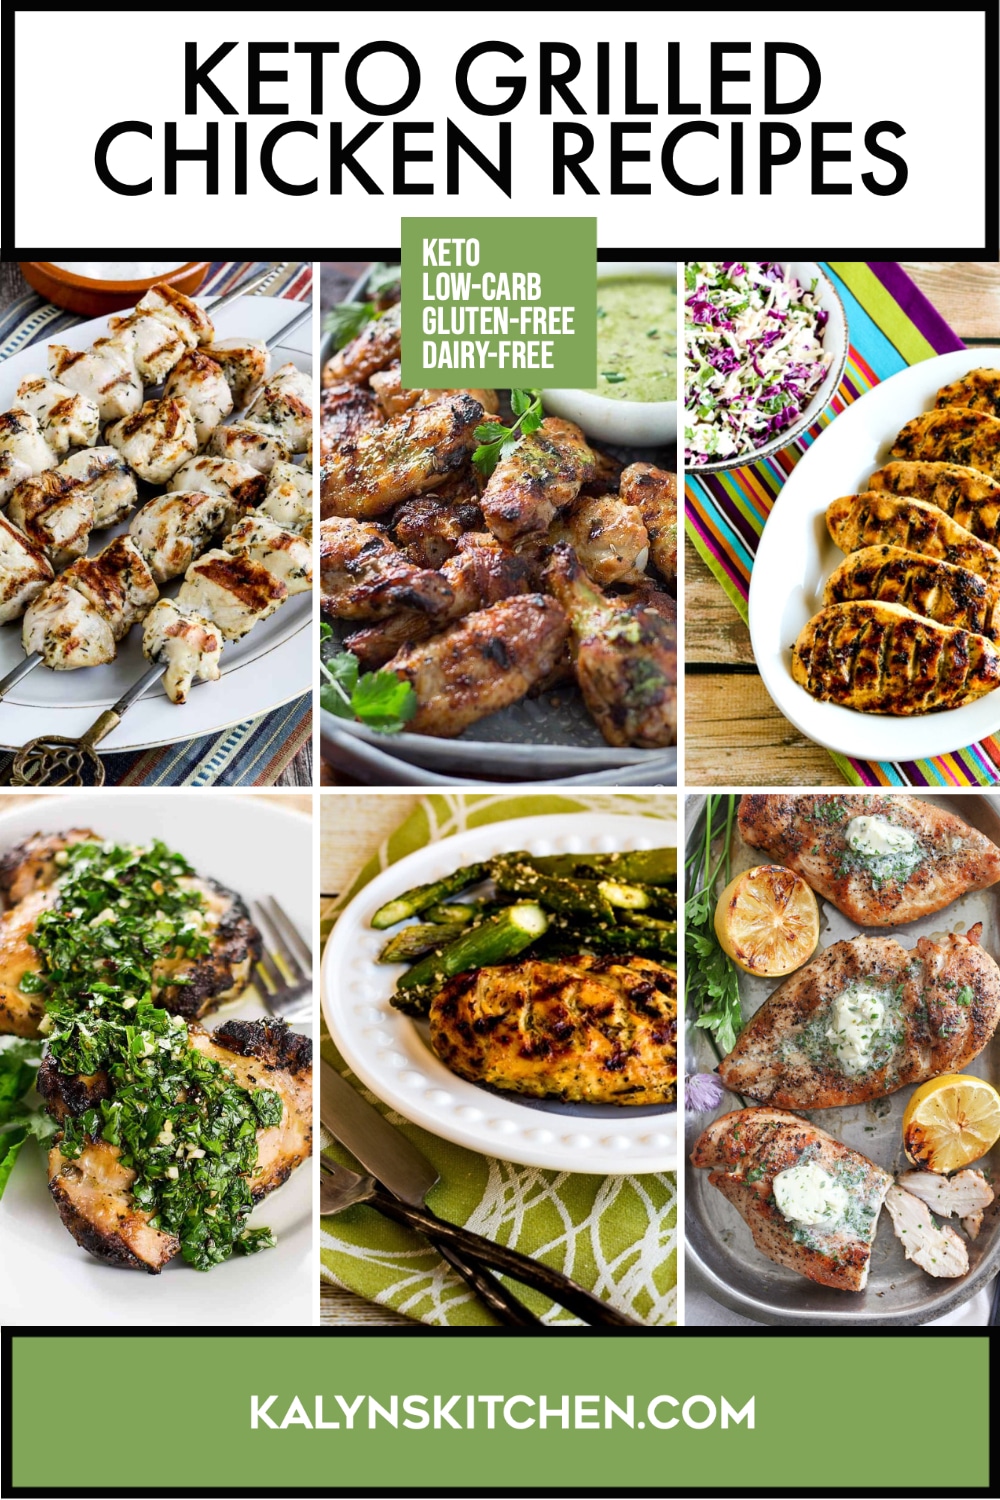 Pinterest image of Keto Grilled Chicken Recipes